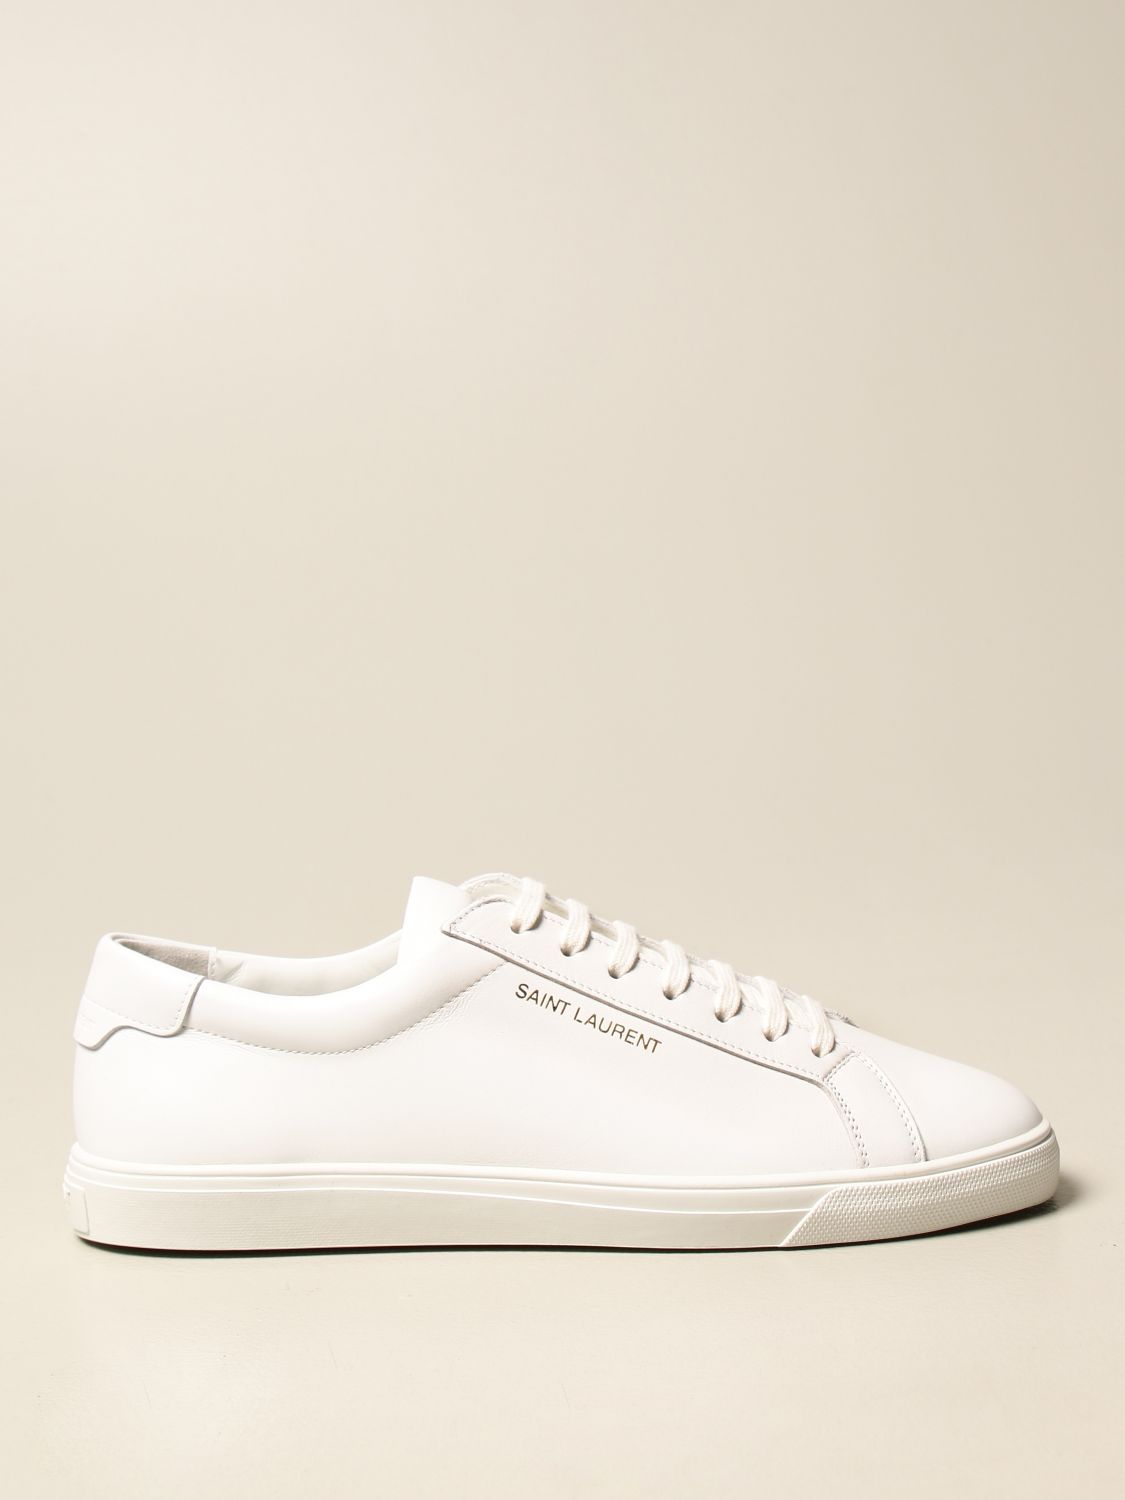 SAINT LAURENT: Andy low top sneakers in leather - White | Saint Laurent ...